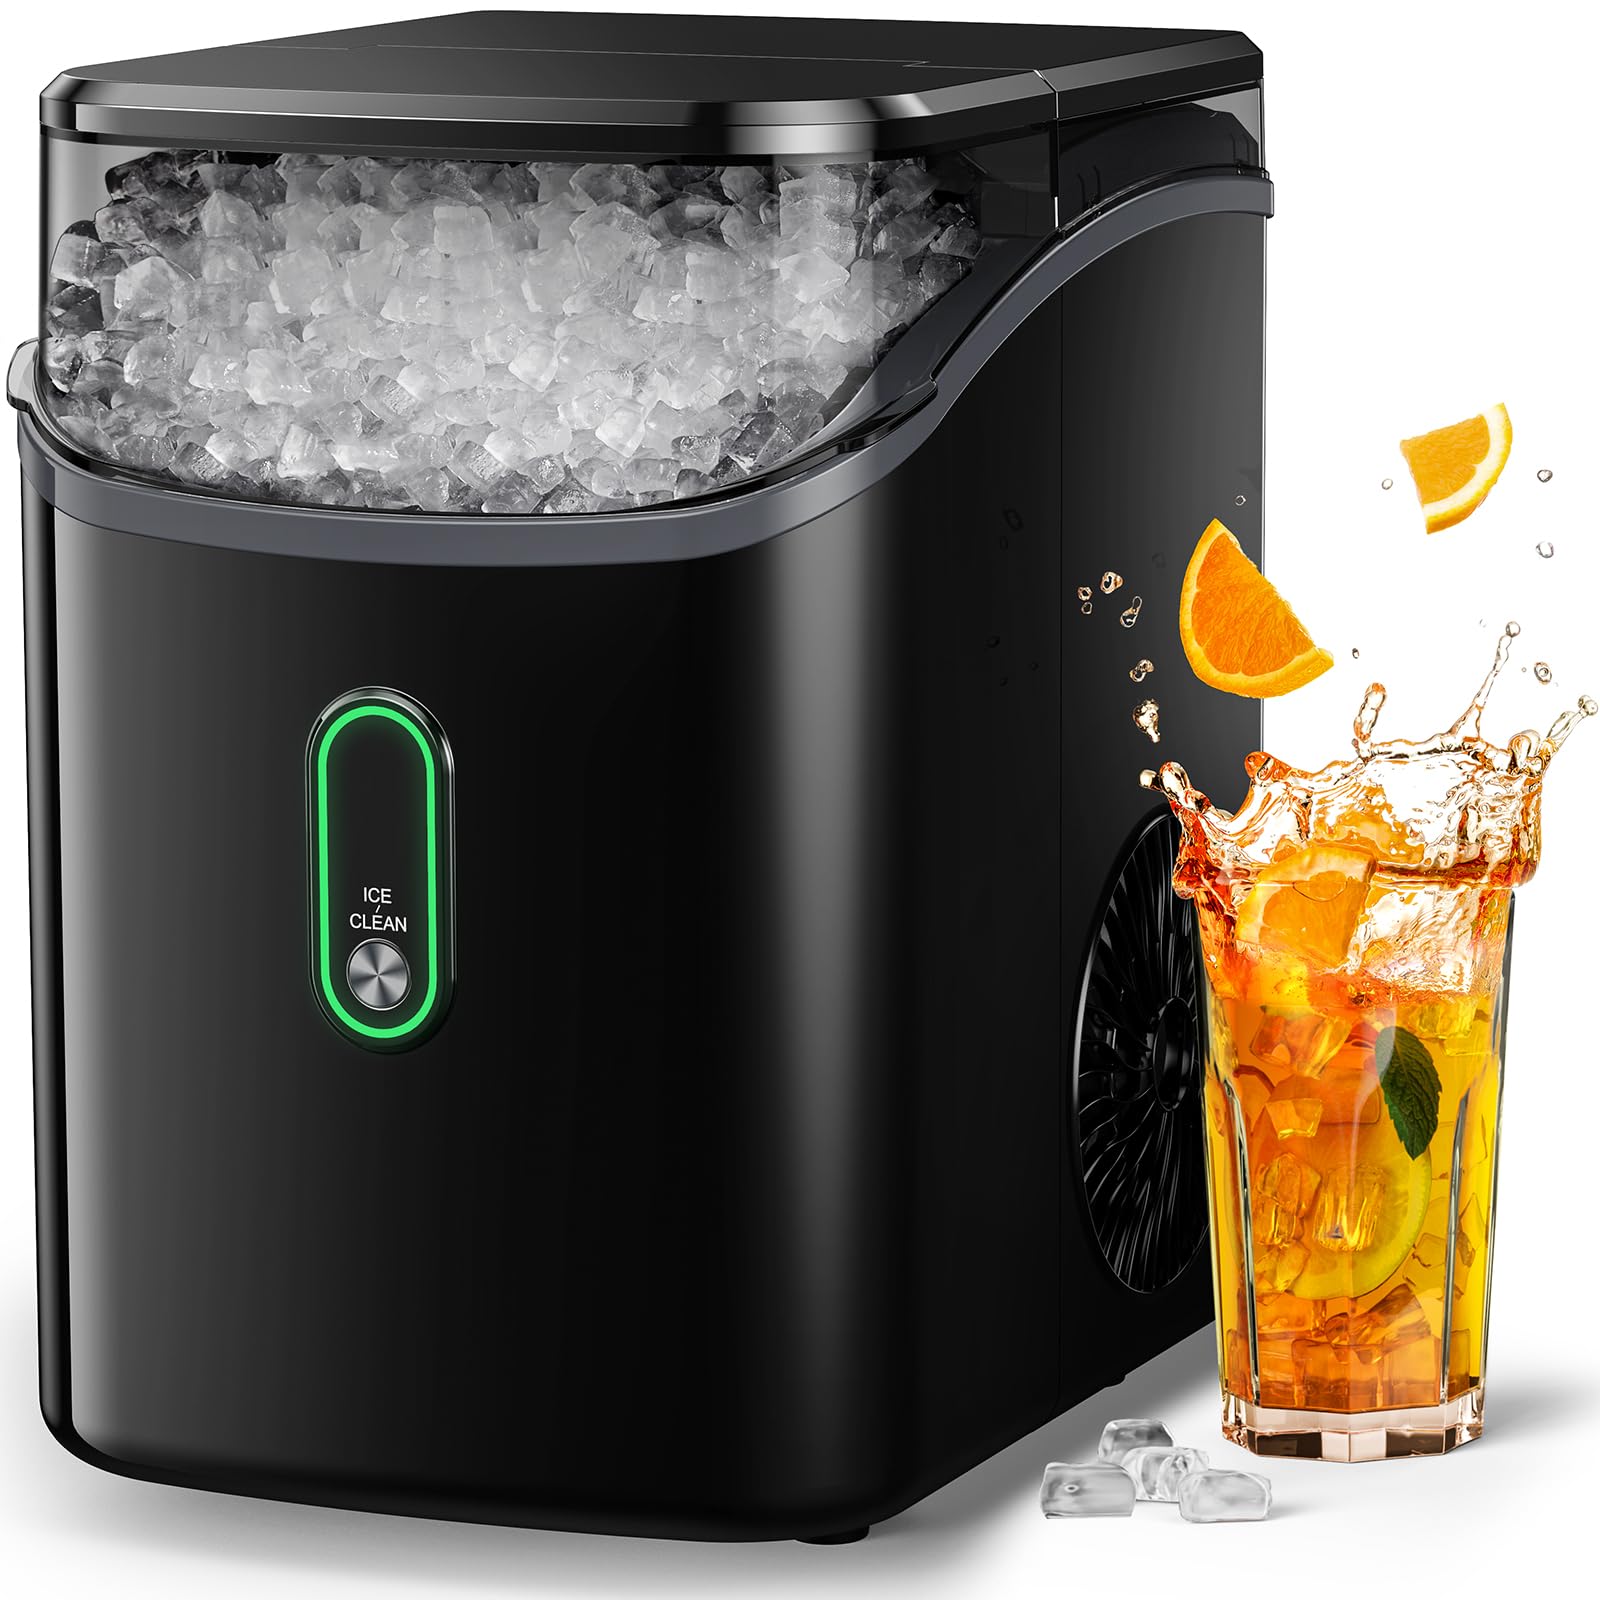 Silonn Nugget Ice Maker Countertop, Pebble Ice Maker with Soft Chewable Ice, One-Click Operation Ice Machine with Self-Cleaning, 33lbs/24H for Home,Kitchen,Office